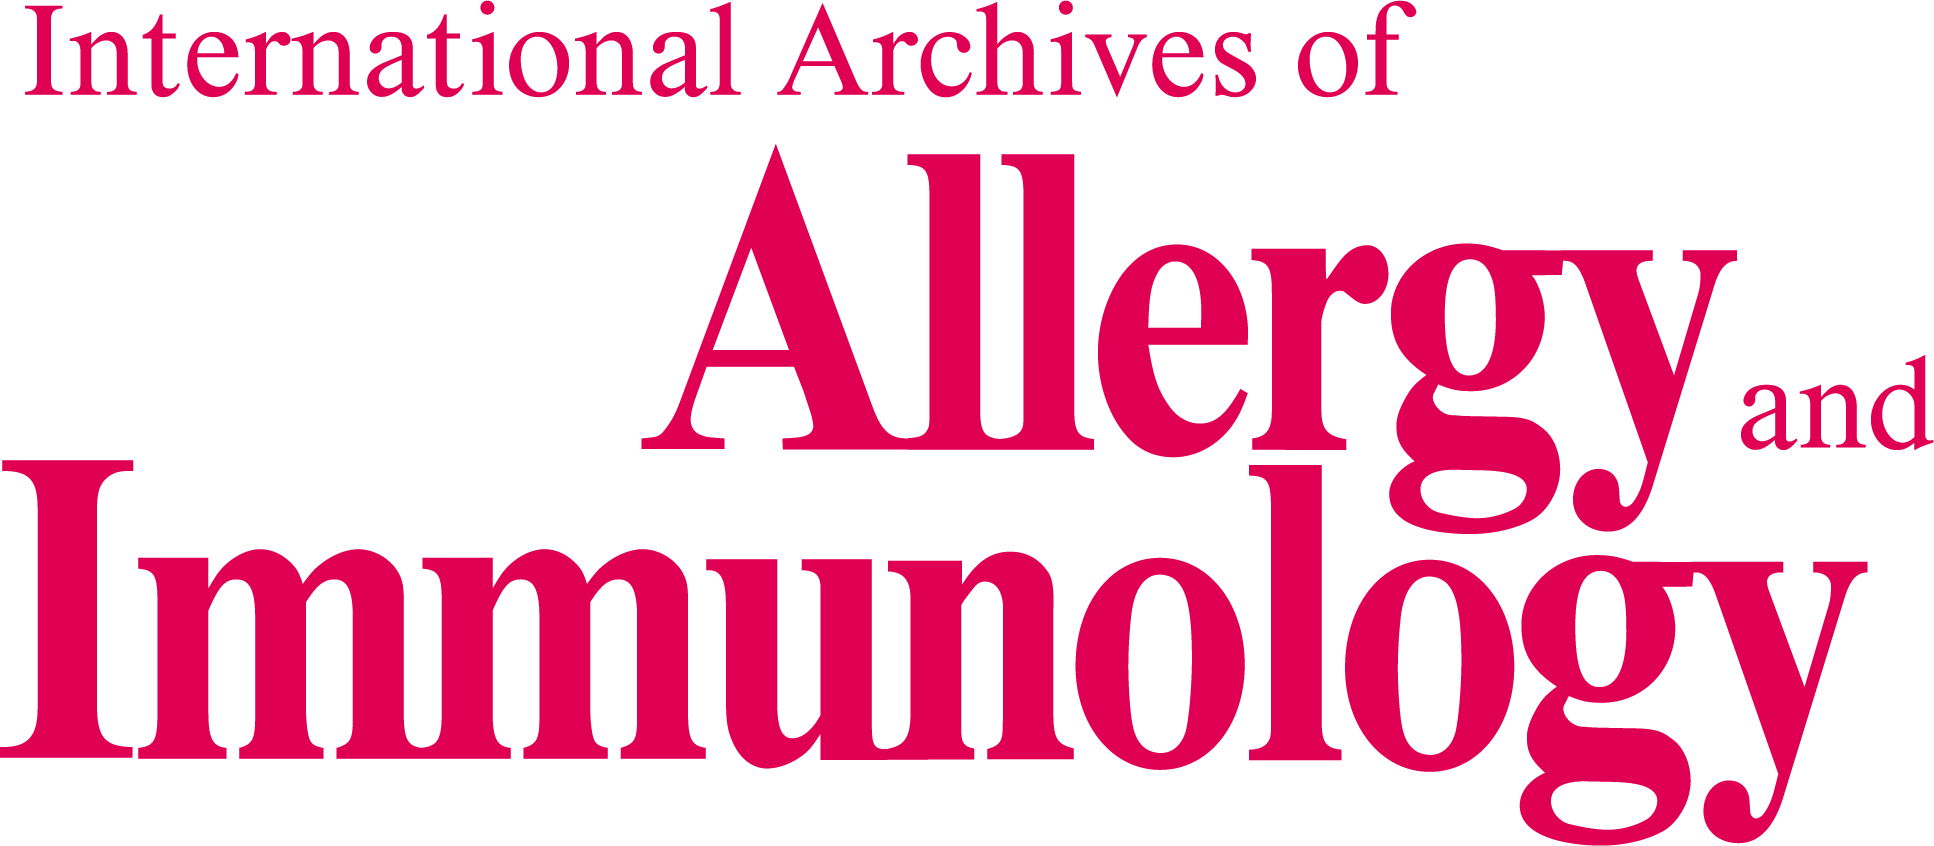 International Archives of Allergy and Immunology (IAA)